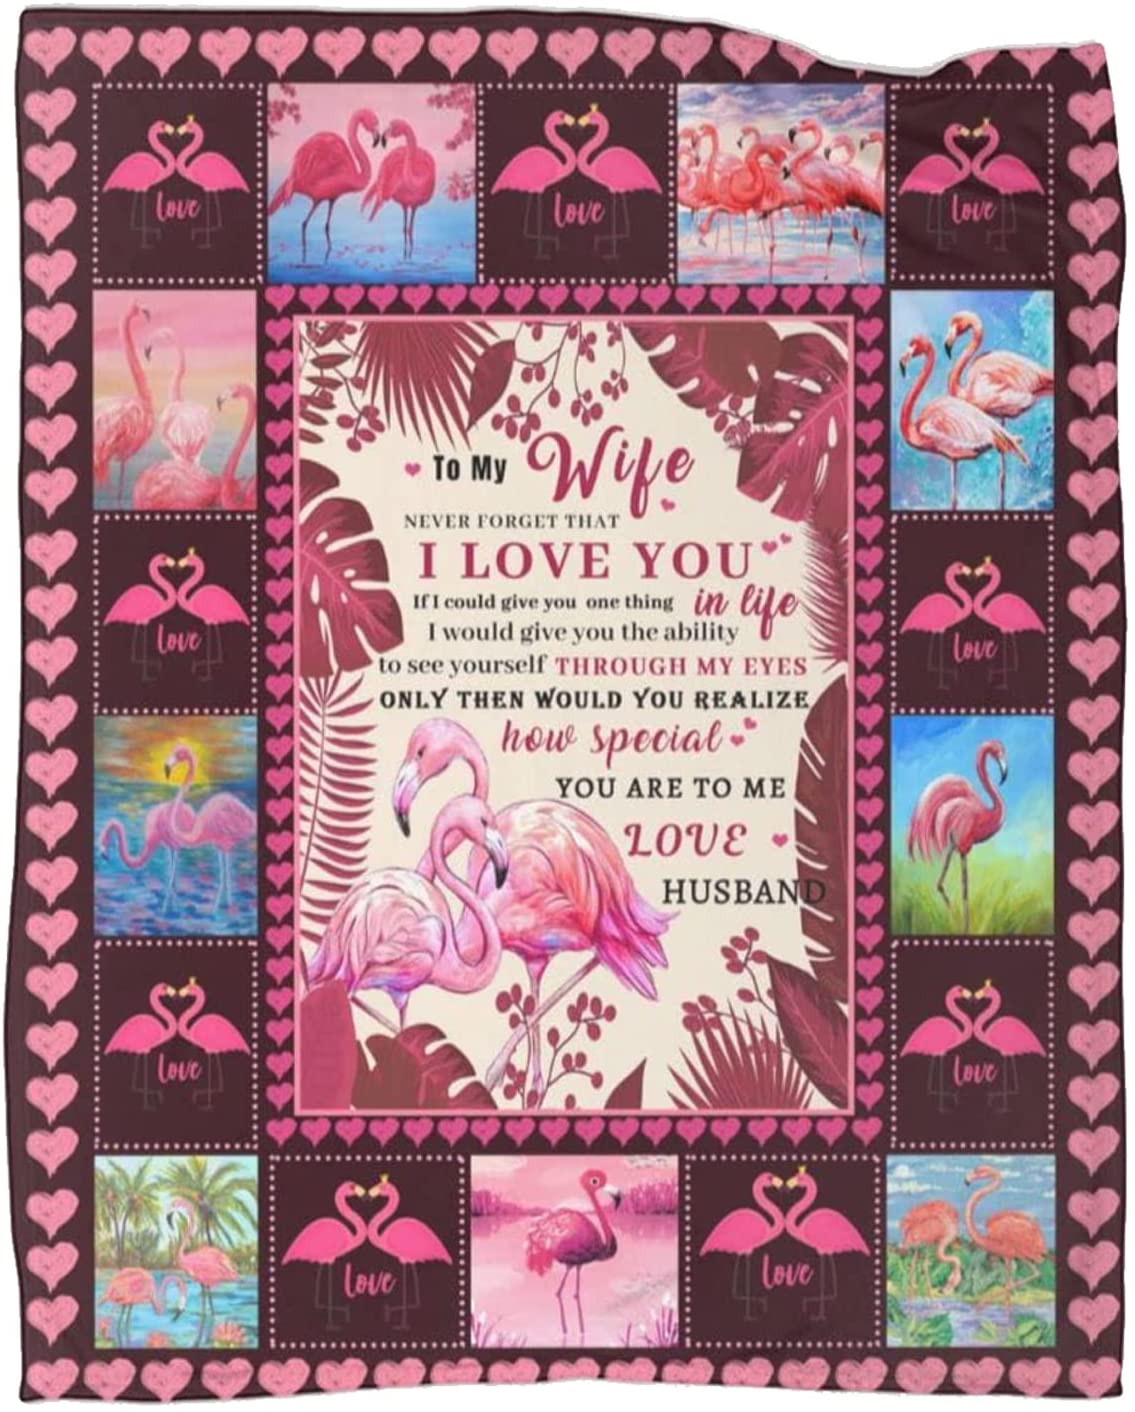 To My Wife Blanket from Husband, Romantic Flamingo Throw Blanket for Bed Sofa, Blanket From Husband To Wife, Best Gift Ideas For Wife